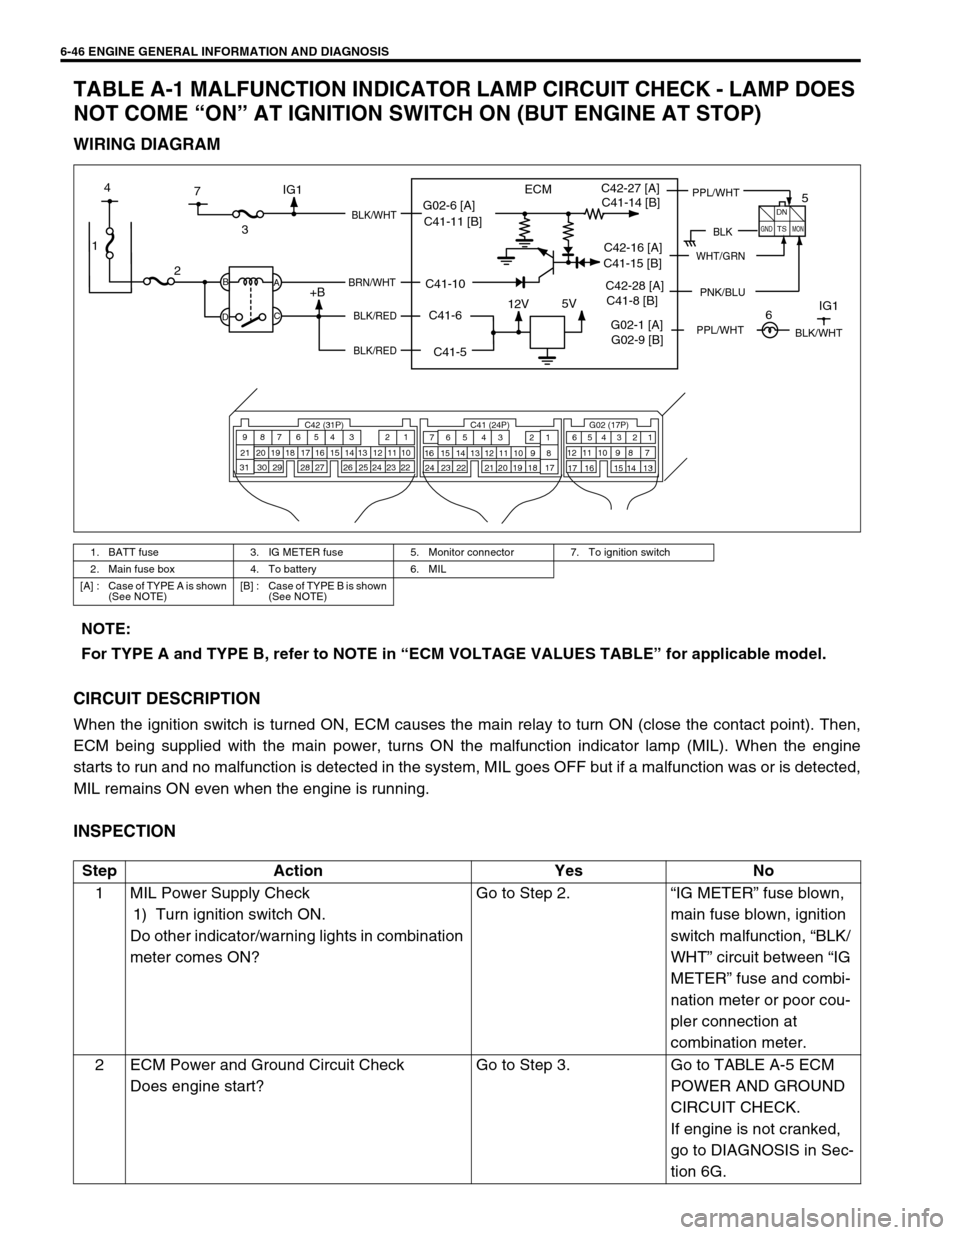 SUZUKI SWIFT 2000 1.G RG413 Service Workshop Manual 6-46 ENGINE GENERAL INFORMATION AND DIAGNOSIS
TABLE A-1 MALFUNCTION INDICATOR LAMP CIRCUIT CHECK - LAMP DOES 
NOT COME “ON” AT IGNITION SWITCH ON (BUT ENGINE AT STOP)
WIRING DIAGRAM
CIRCUIT DESCRI